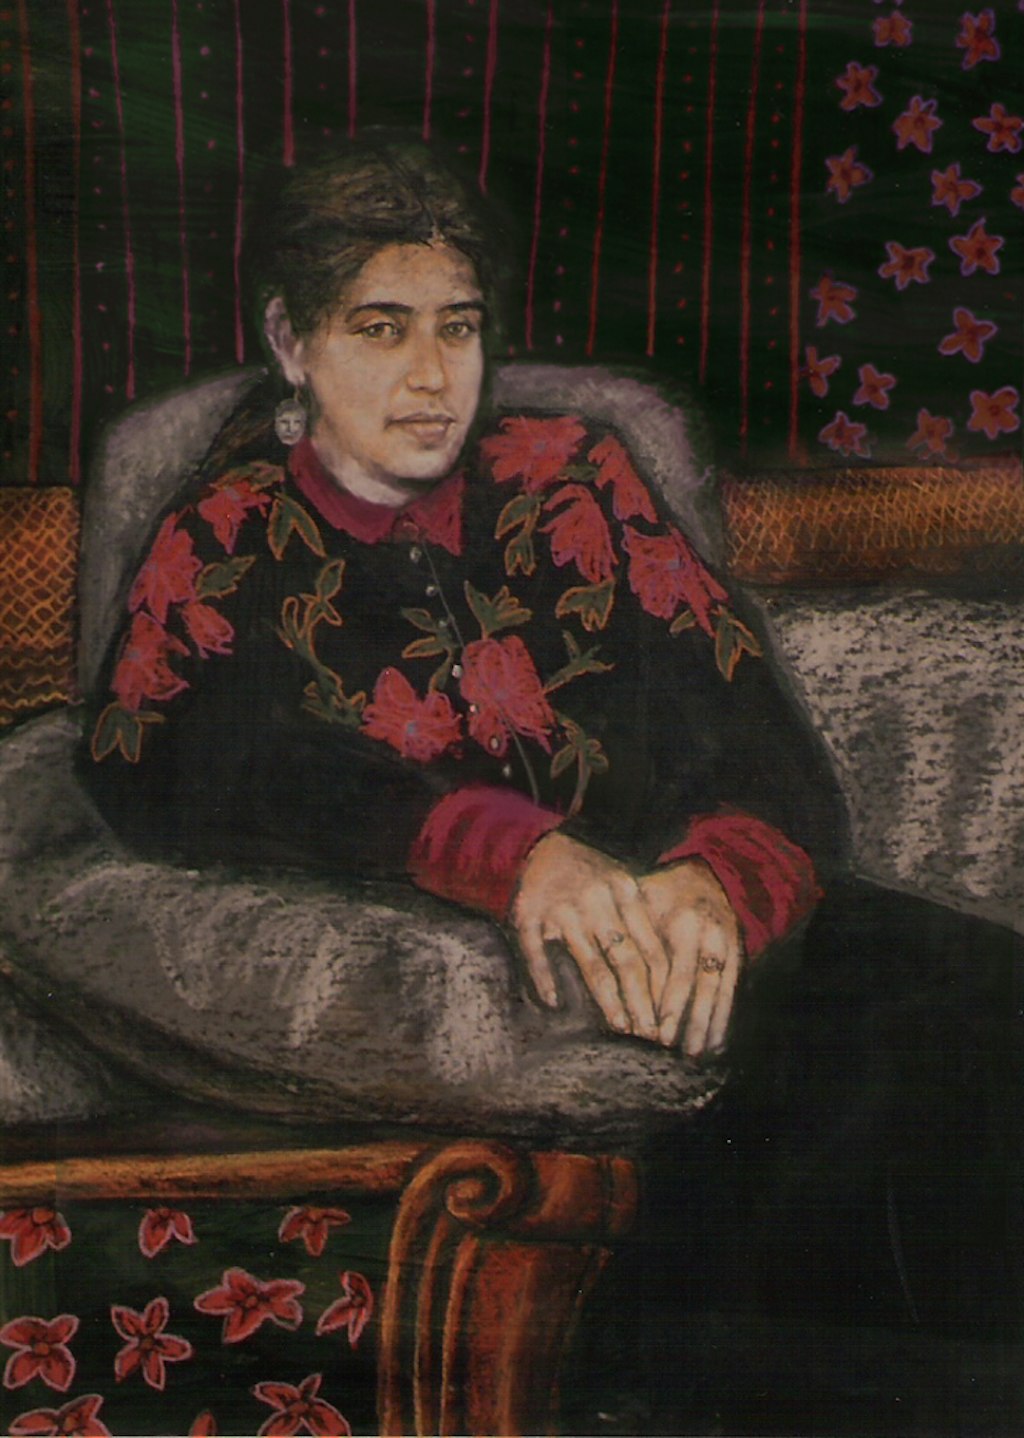 Woman in a grey armchair, her two hands on its right arm. Her long dark hair is pulled back, revealing an earring with a face dangling from her right ear. She is wearing dark buttoned-up top with dark pink cuffs, collar and flowers and dark green leaves. A similar floral motif is in background wallpaper and foreground furniture.